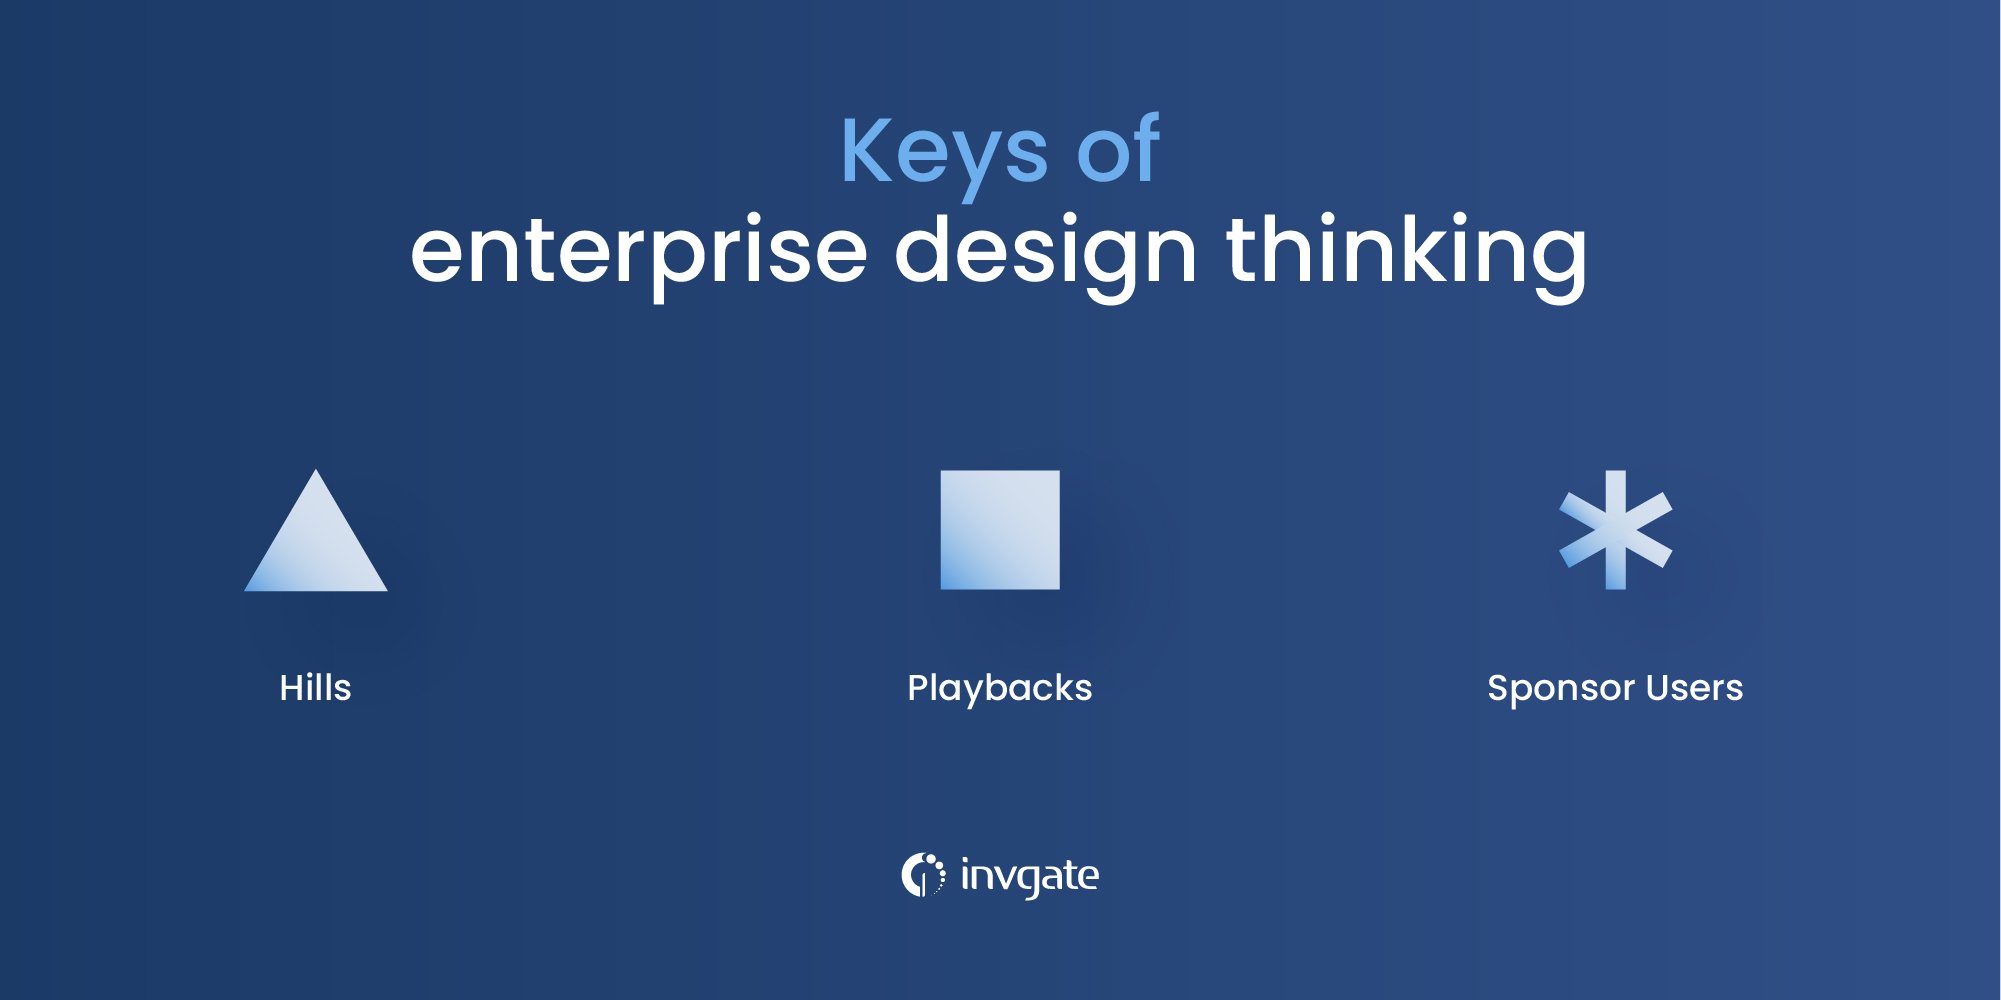 Keys are what make ideas become tangible results, and they serve as an aligning agent to keep all enterprise teams connected and coordinated.